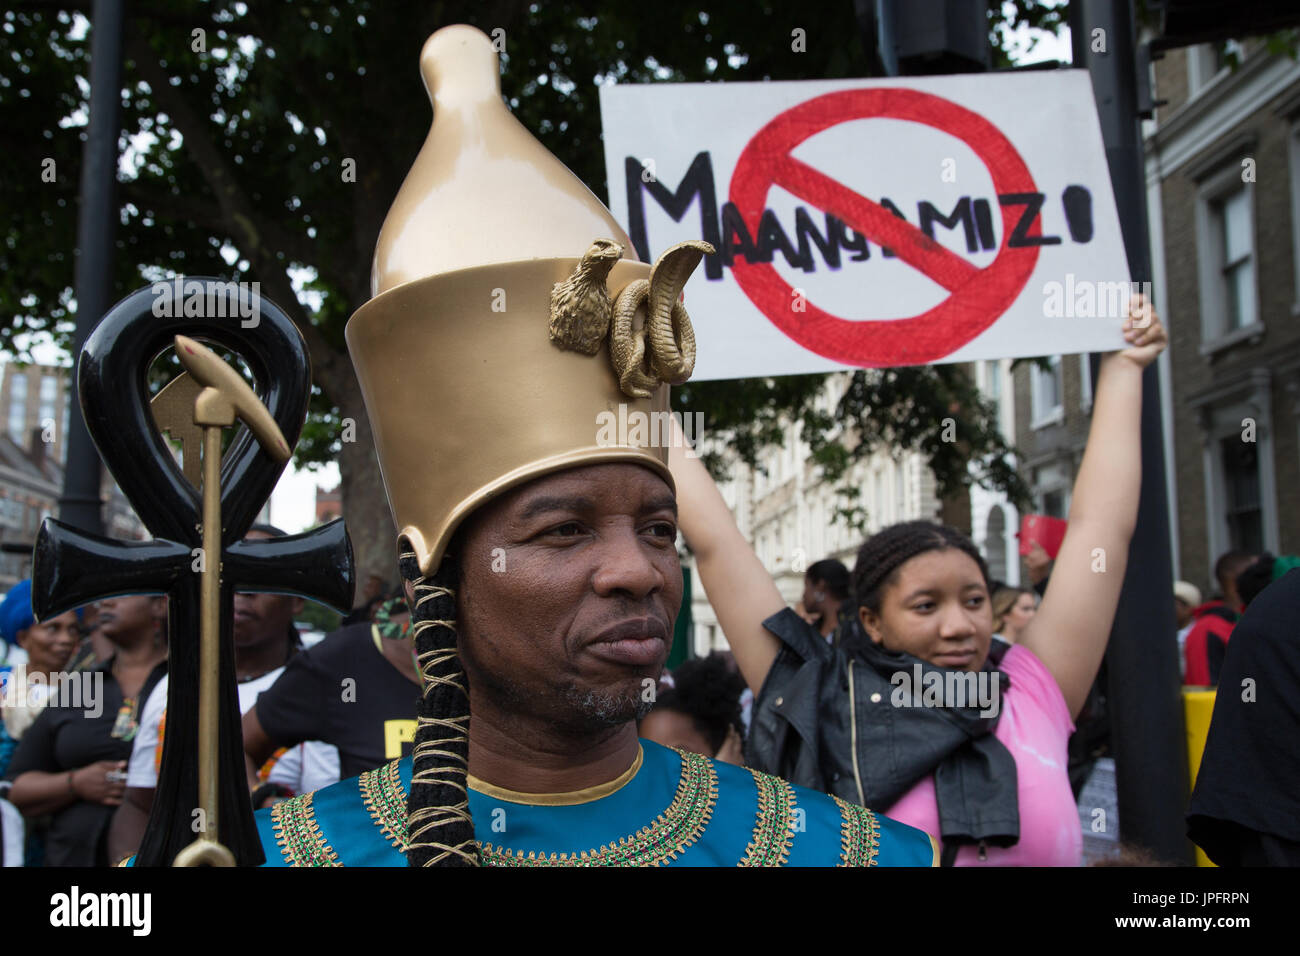 London, UK. 1st Aug, 2017. People with banners and placards March in London on 1st August to counter African Holocaust (Maangamizi) denial and demand holistic reparatory justice for the African Holocaust. Credit: Thabo Jaiyesimi/Alamy Live News Stock Photo